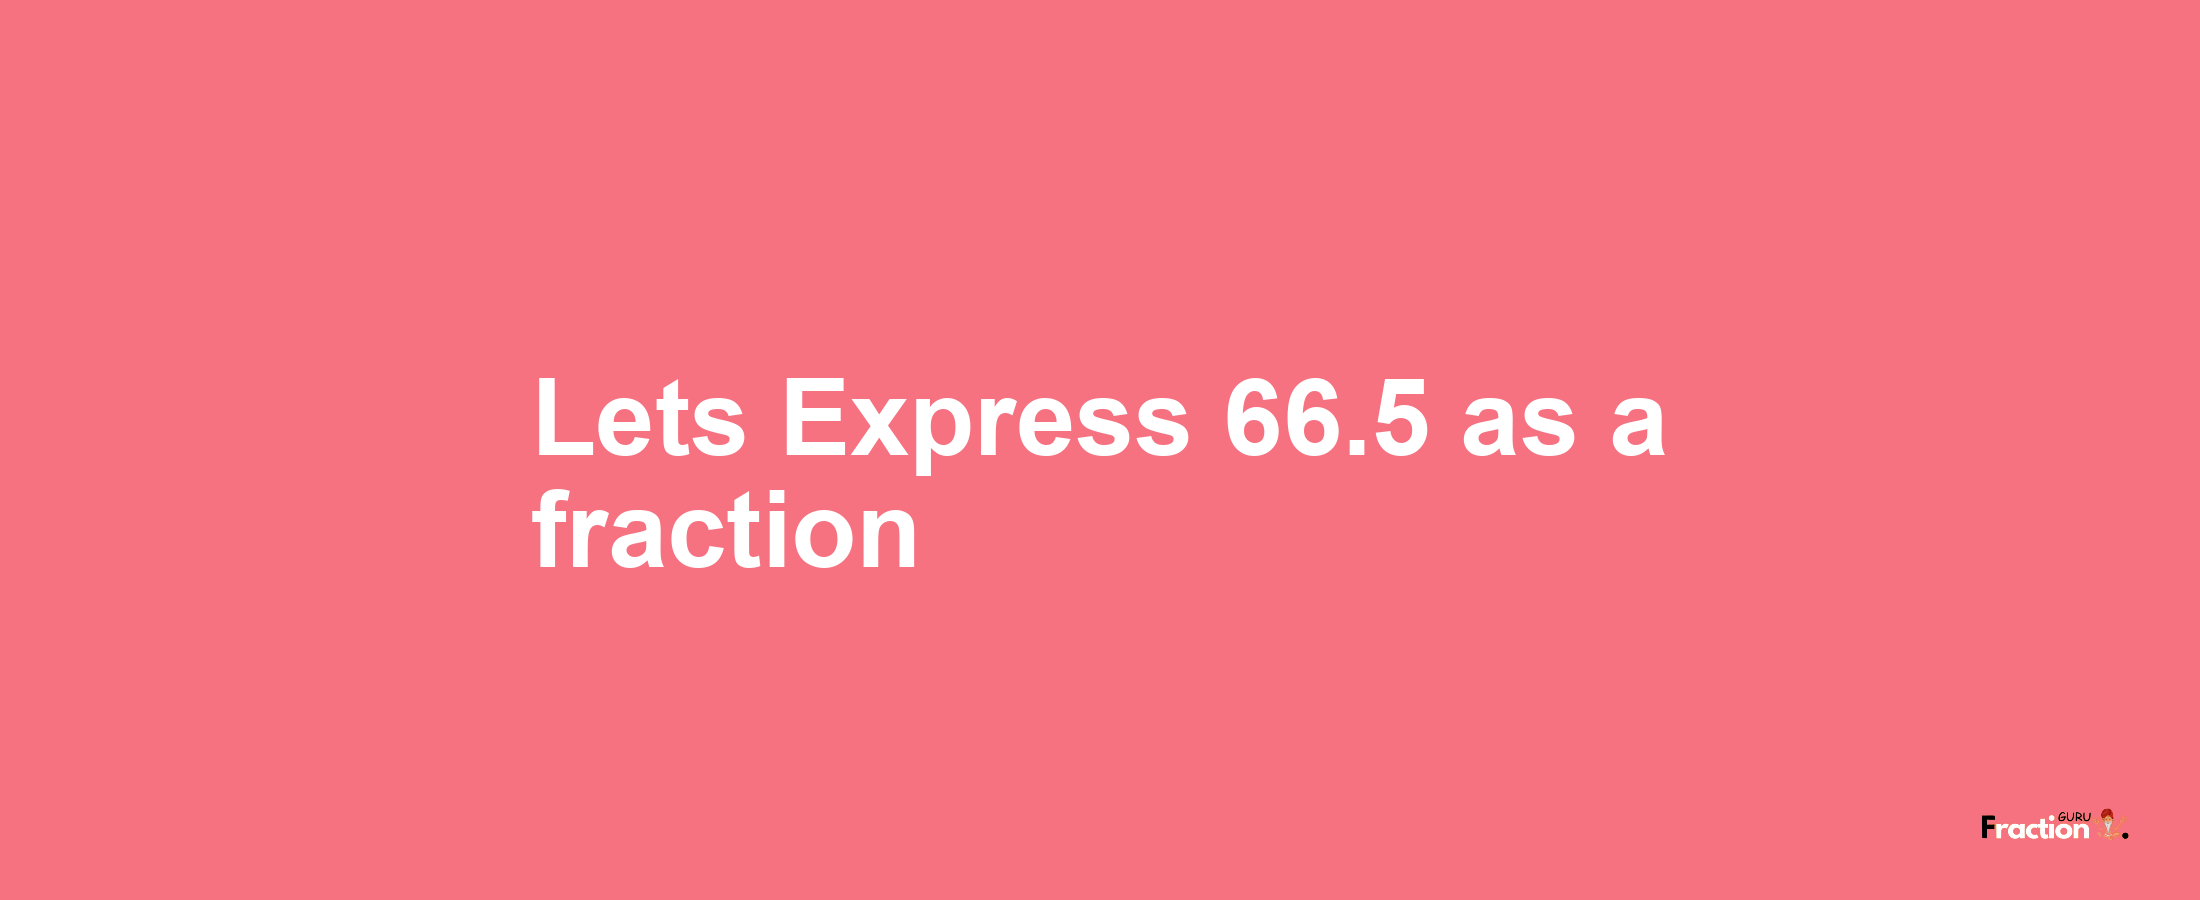 Lets Express 66.5 as afraction